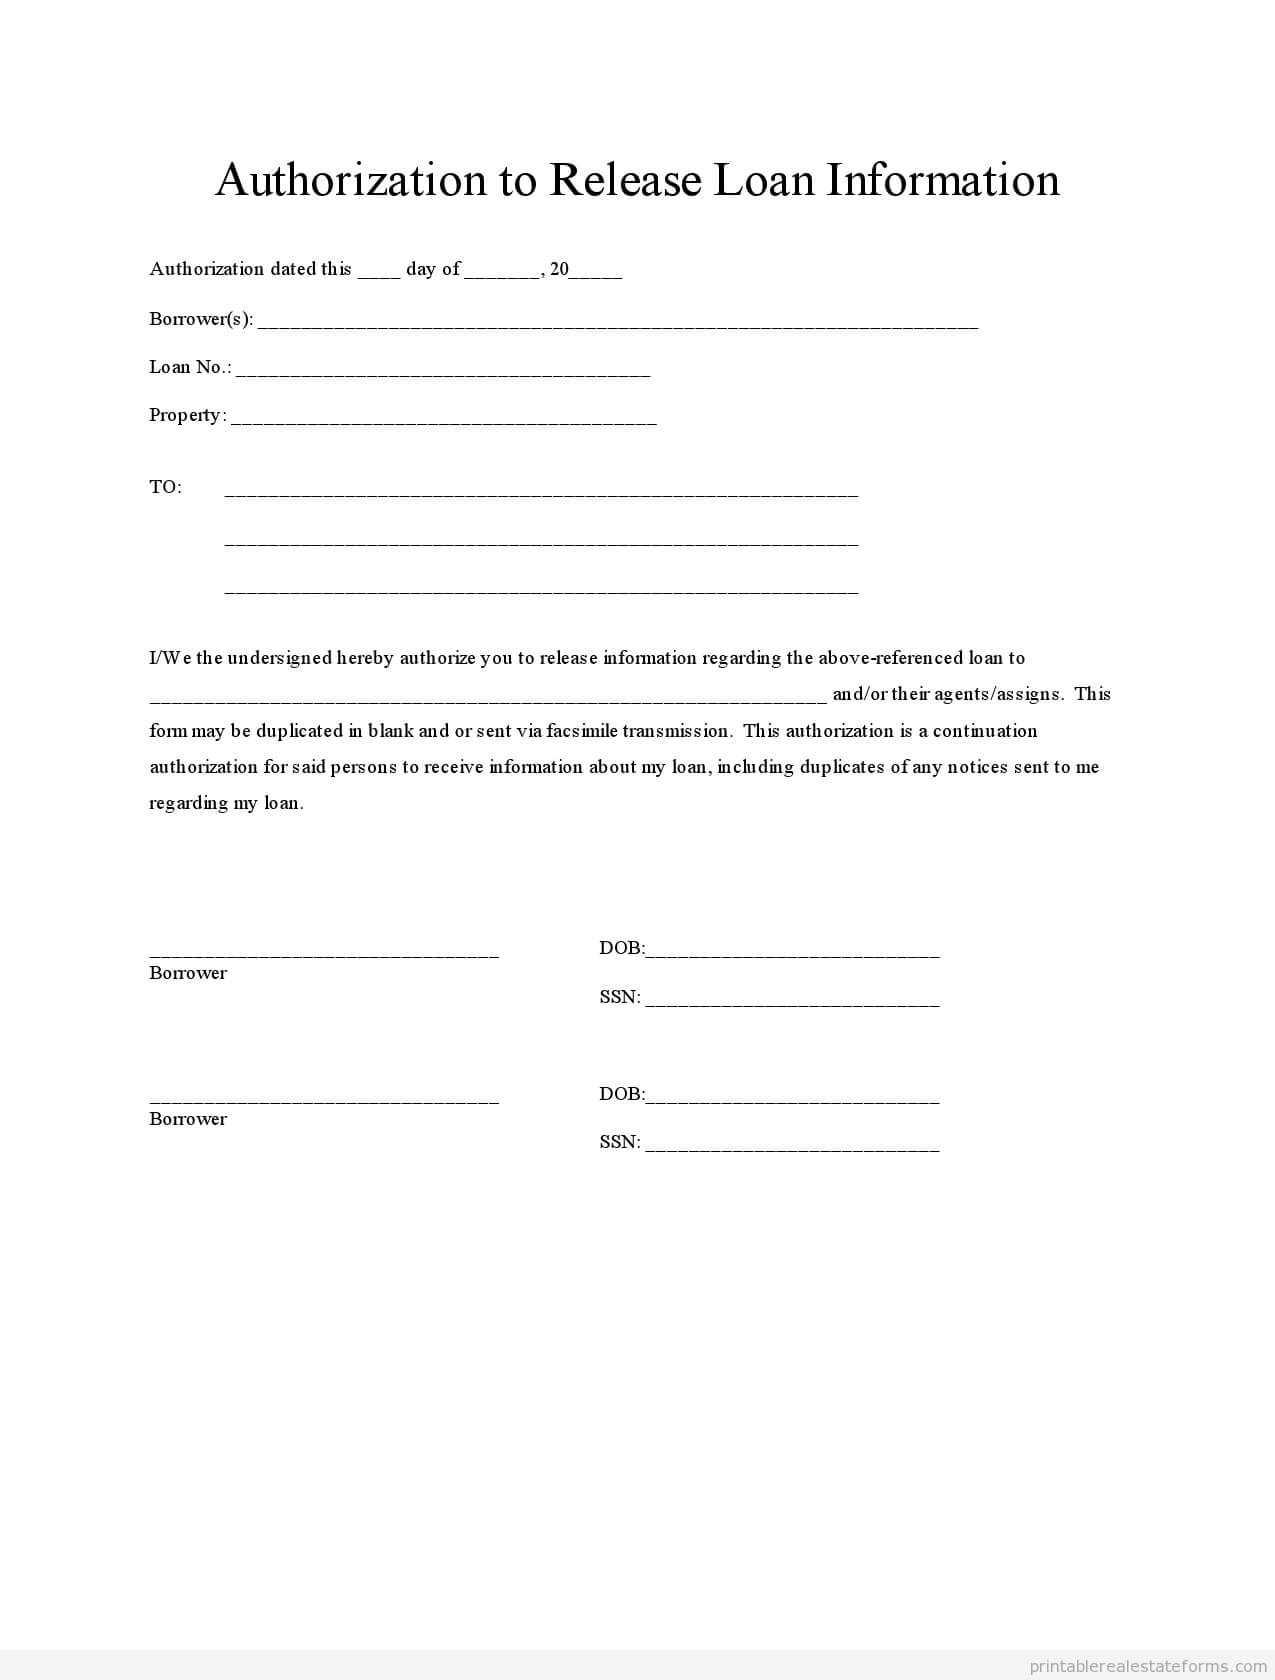 Printable Loan Authorization 2 Template 2015 | Real Estate With Blank Legal Document Template